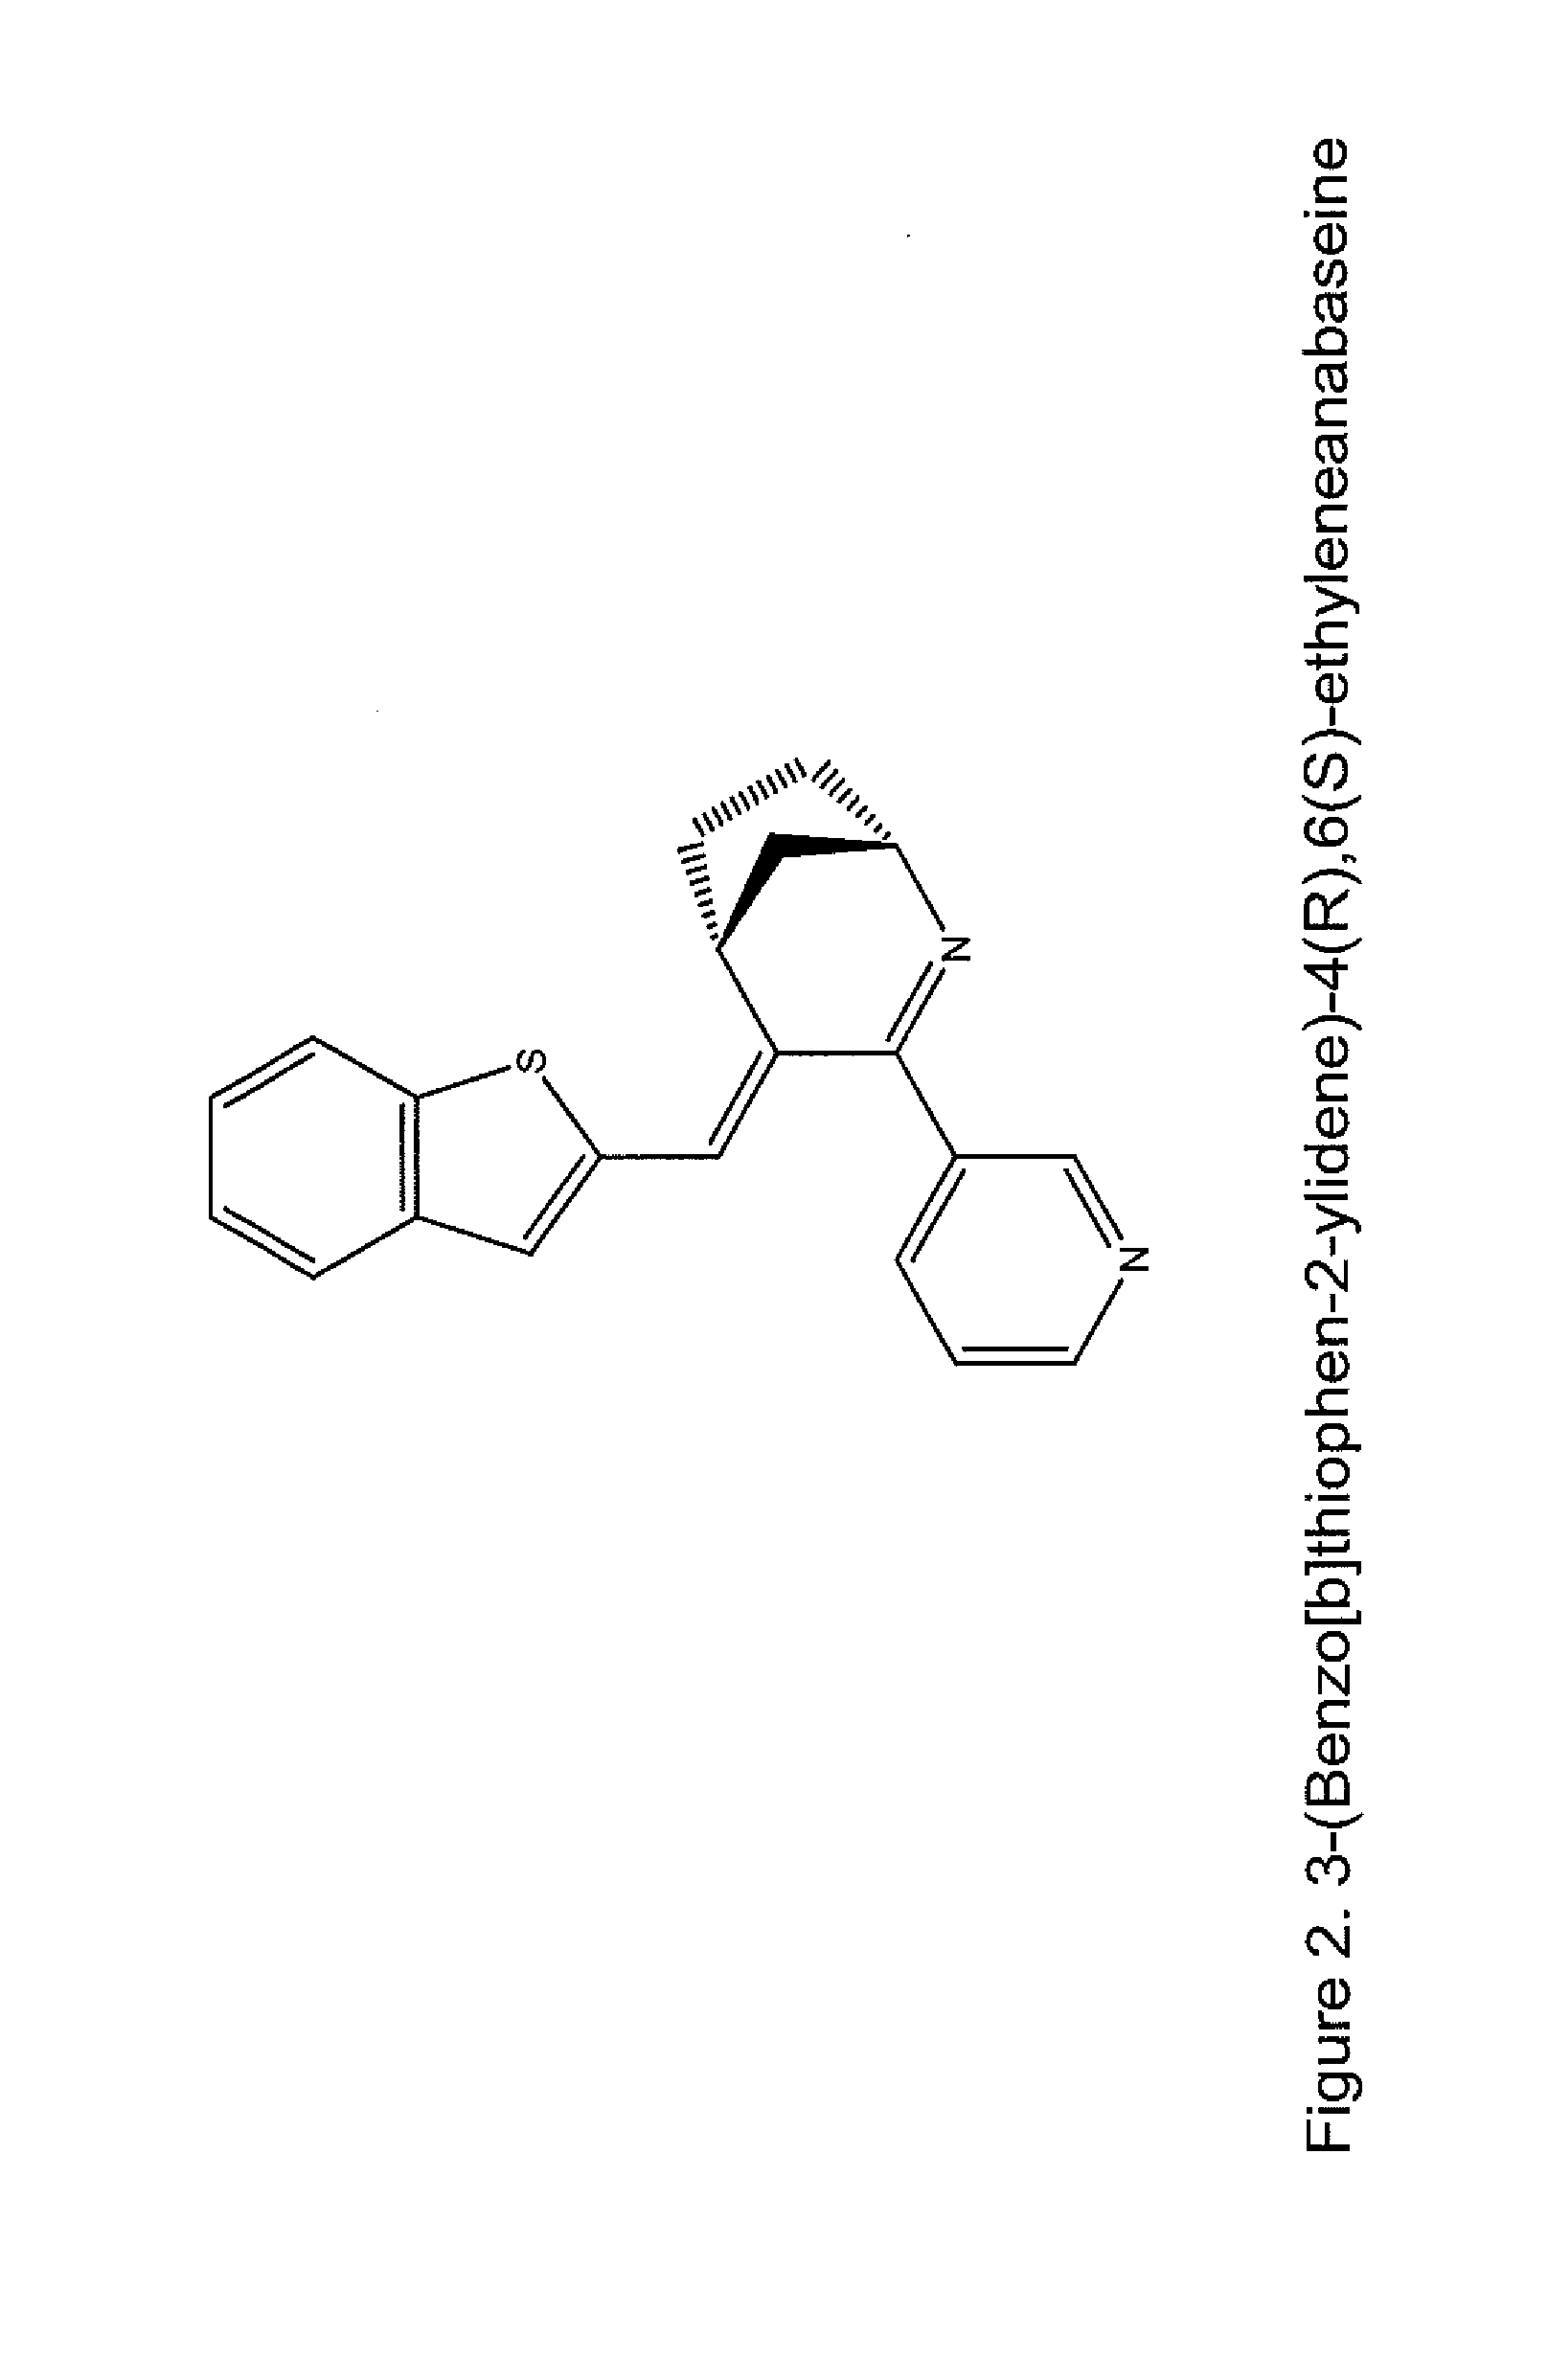 Nicotine receptor targeted compounds and compositions